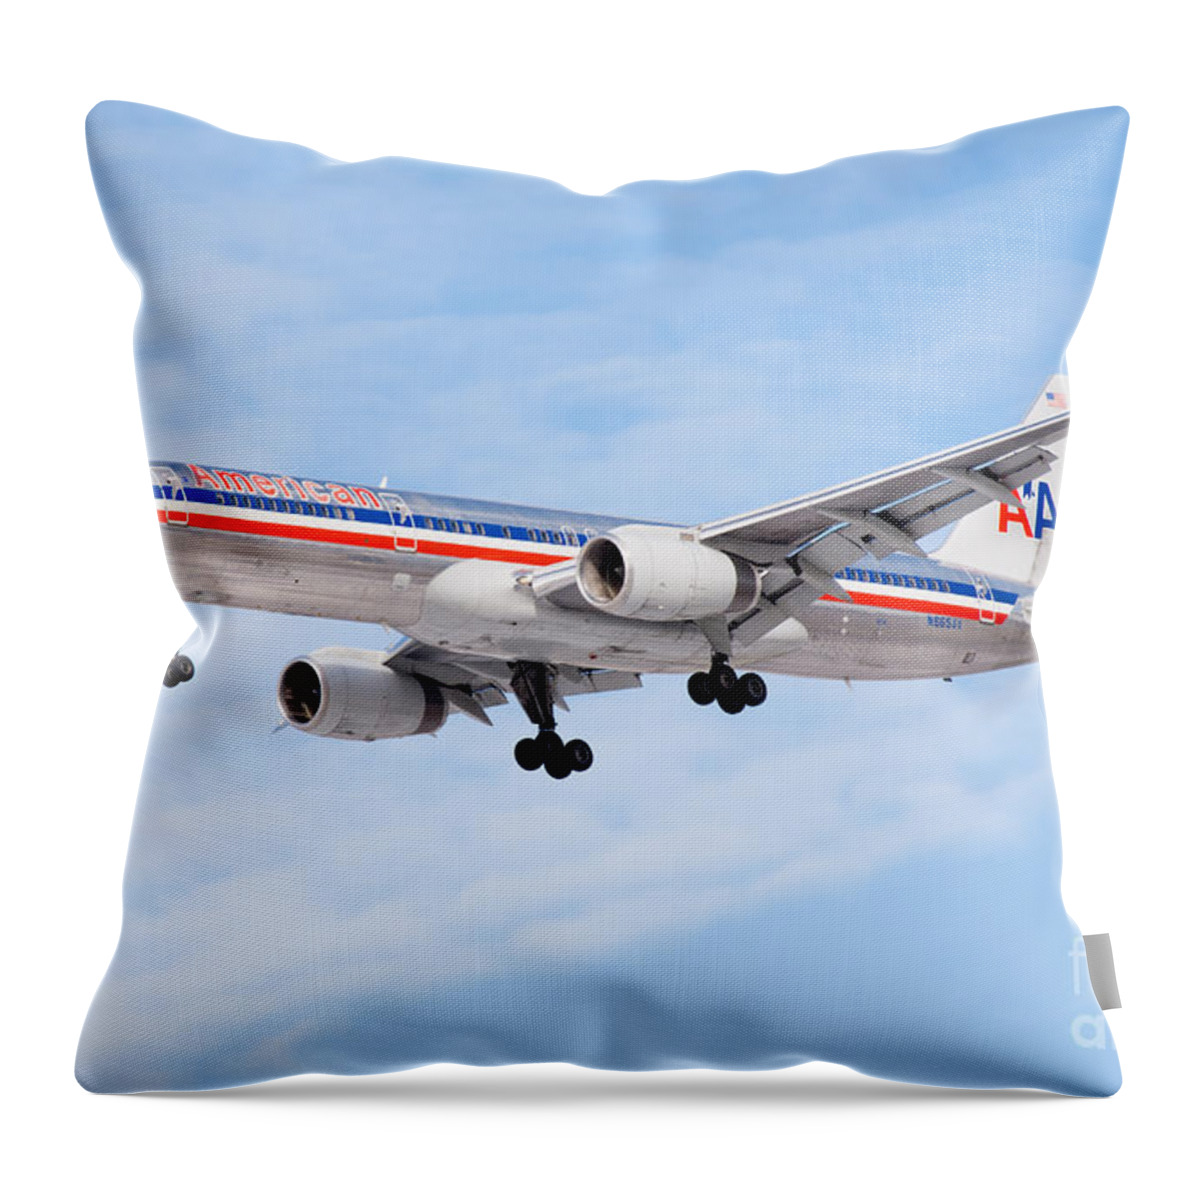 757 Throw Pillow featuring the photograph Amercian Airlines Boeing 757 Airplane Landing by Paul Velgos